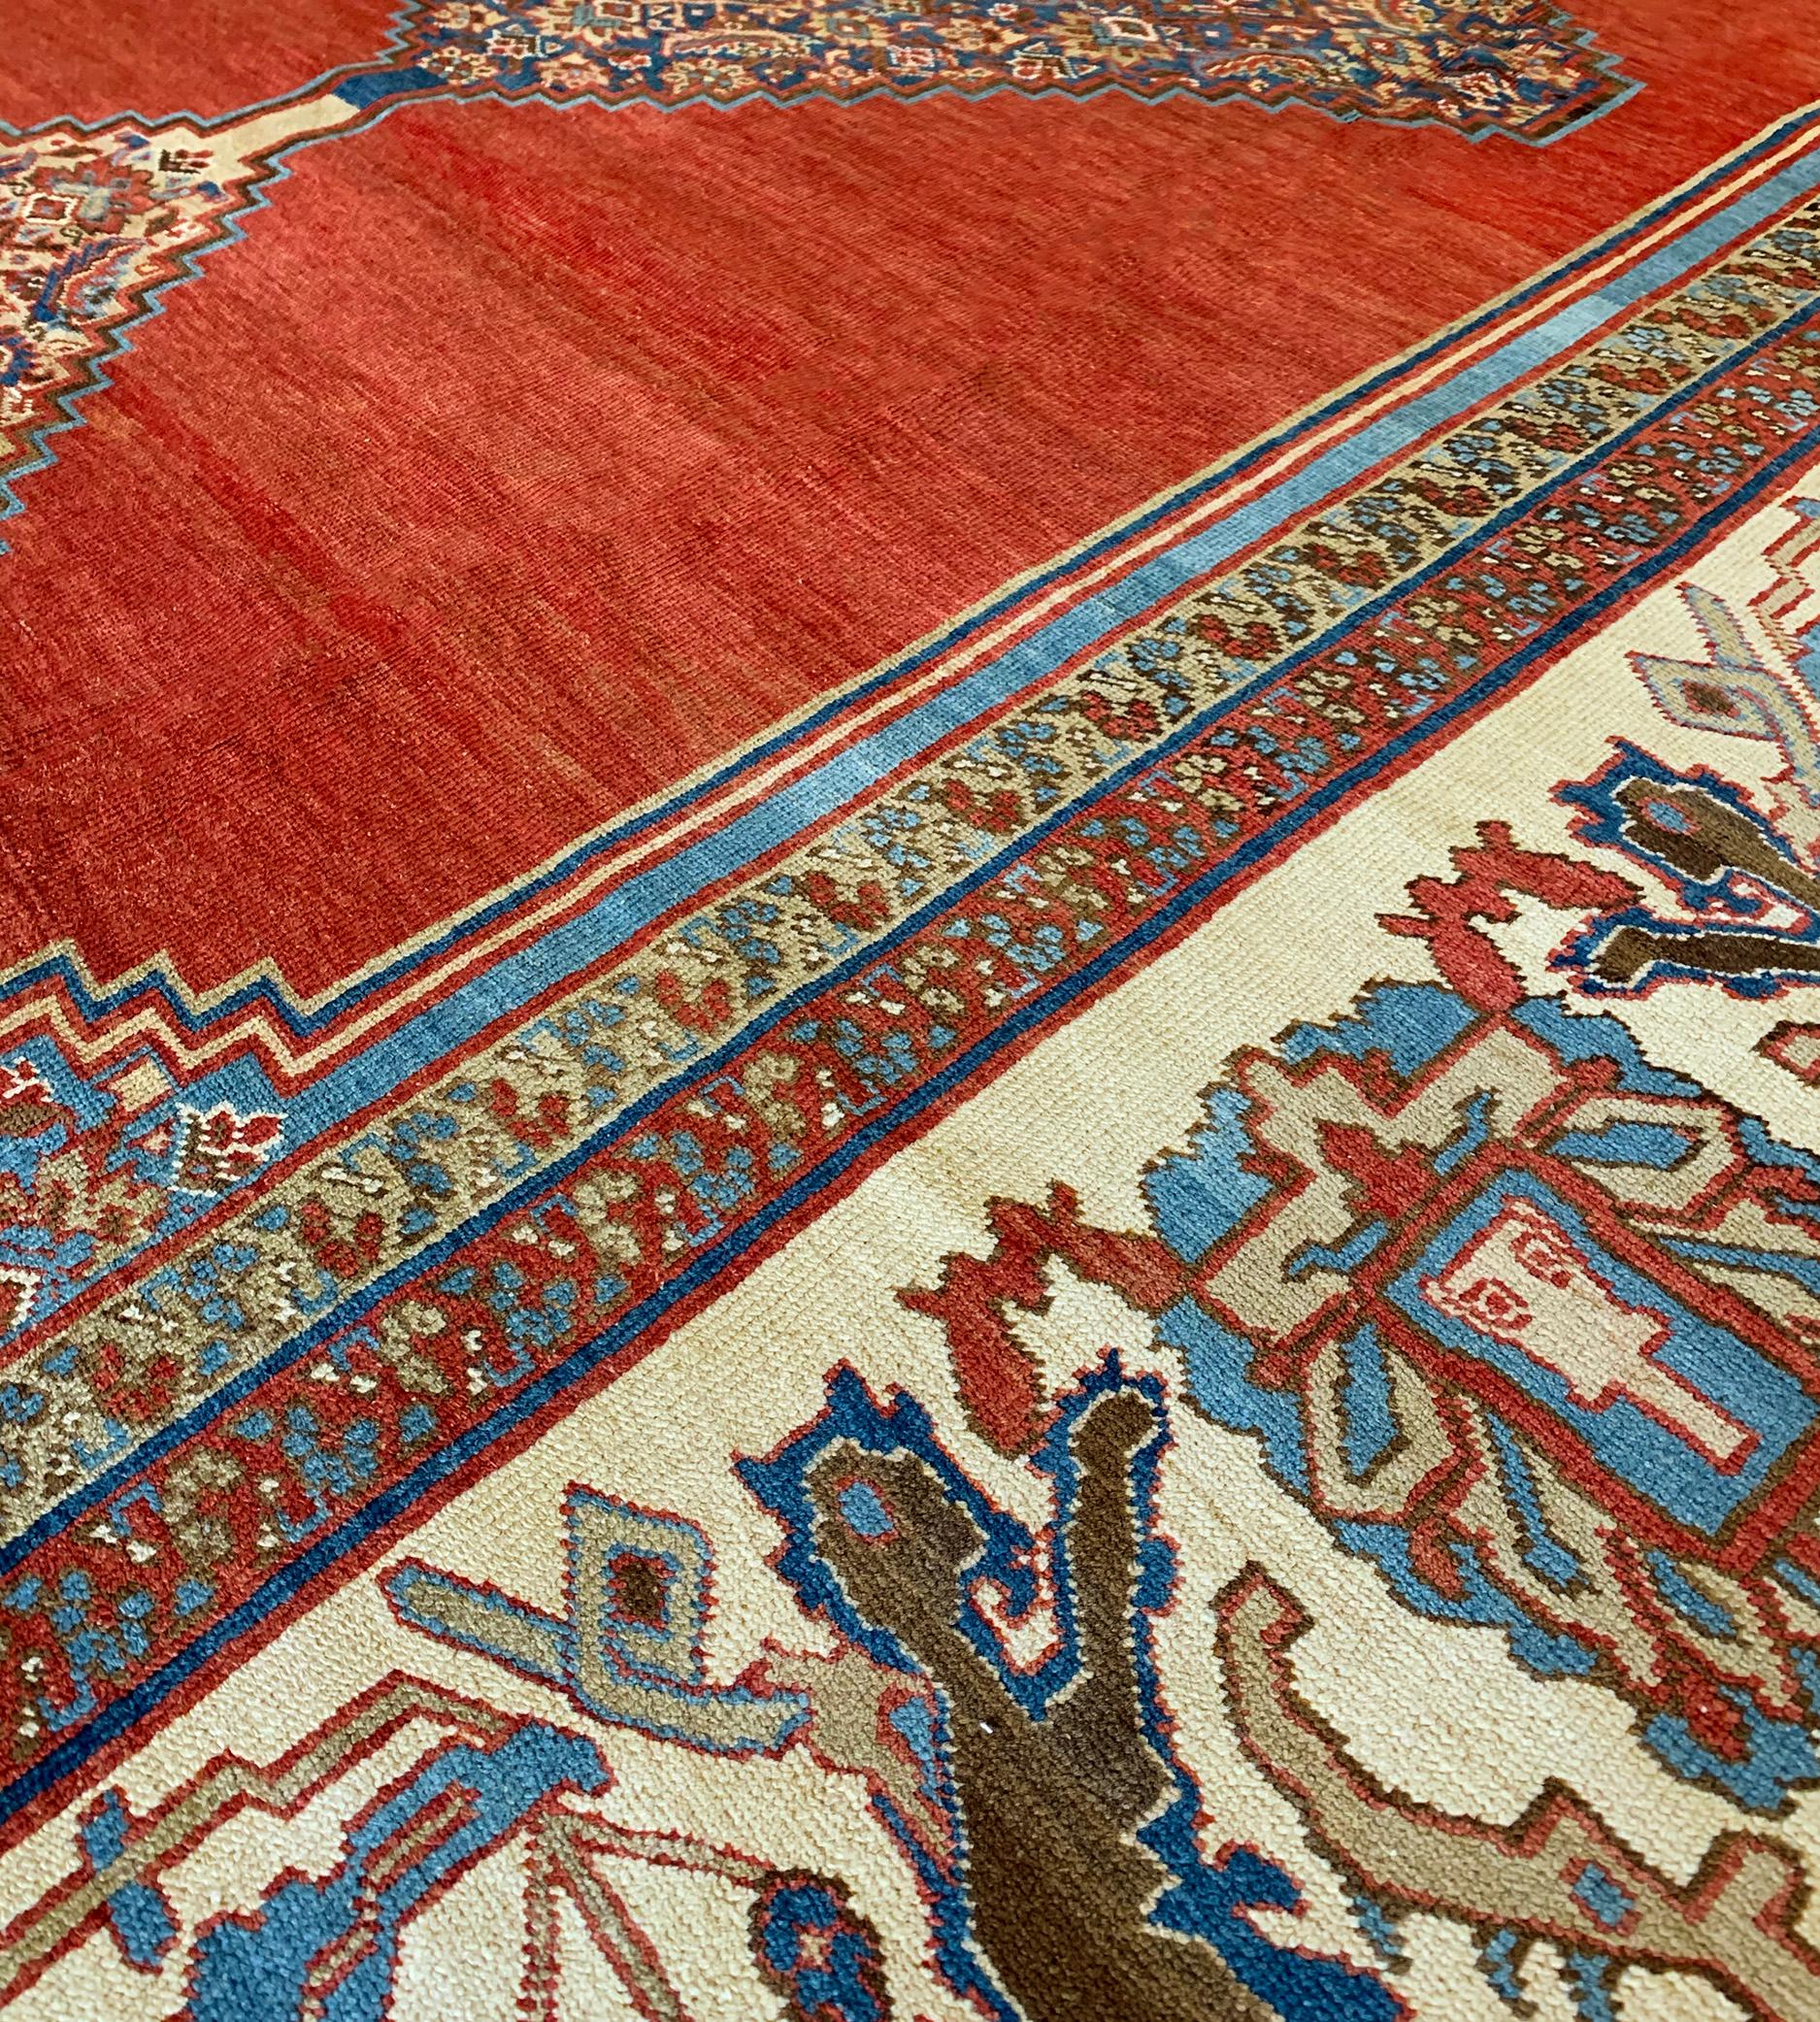 Hand-Woven Late 19th Century Wool Bakhshaish Rug In Good Condition For Sale In West Hollywood, CA